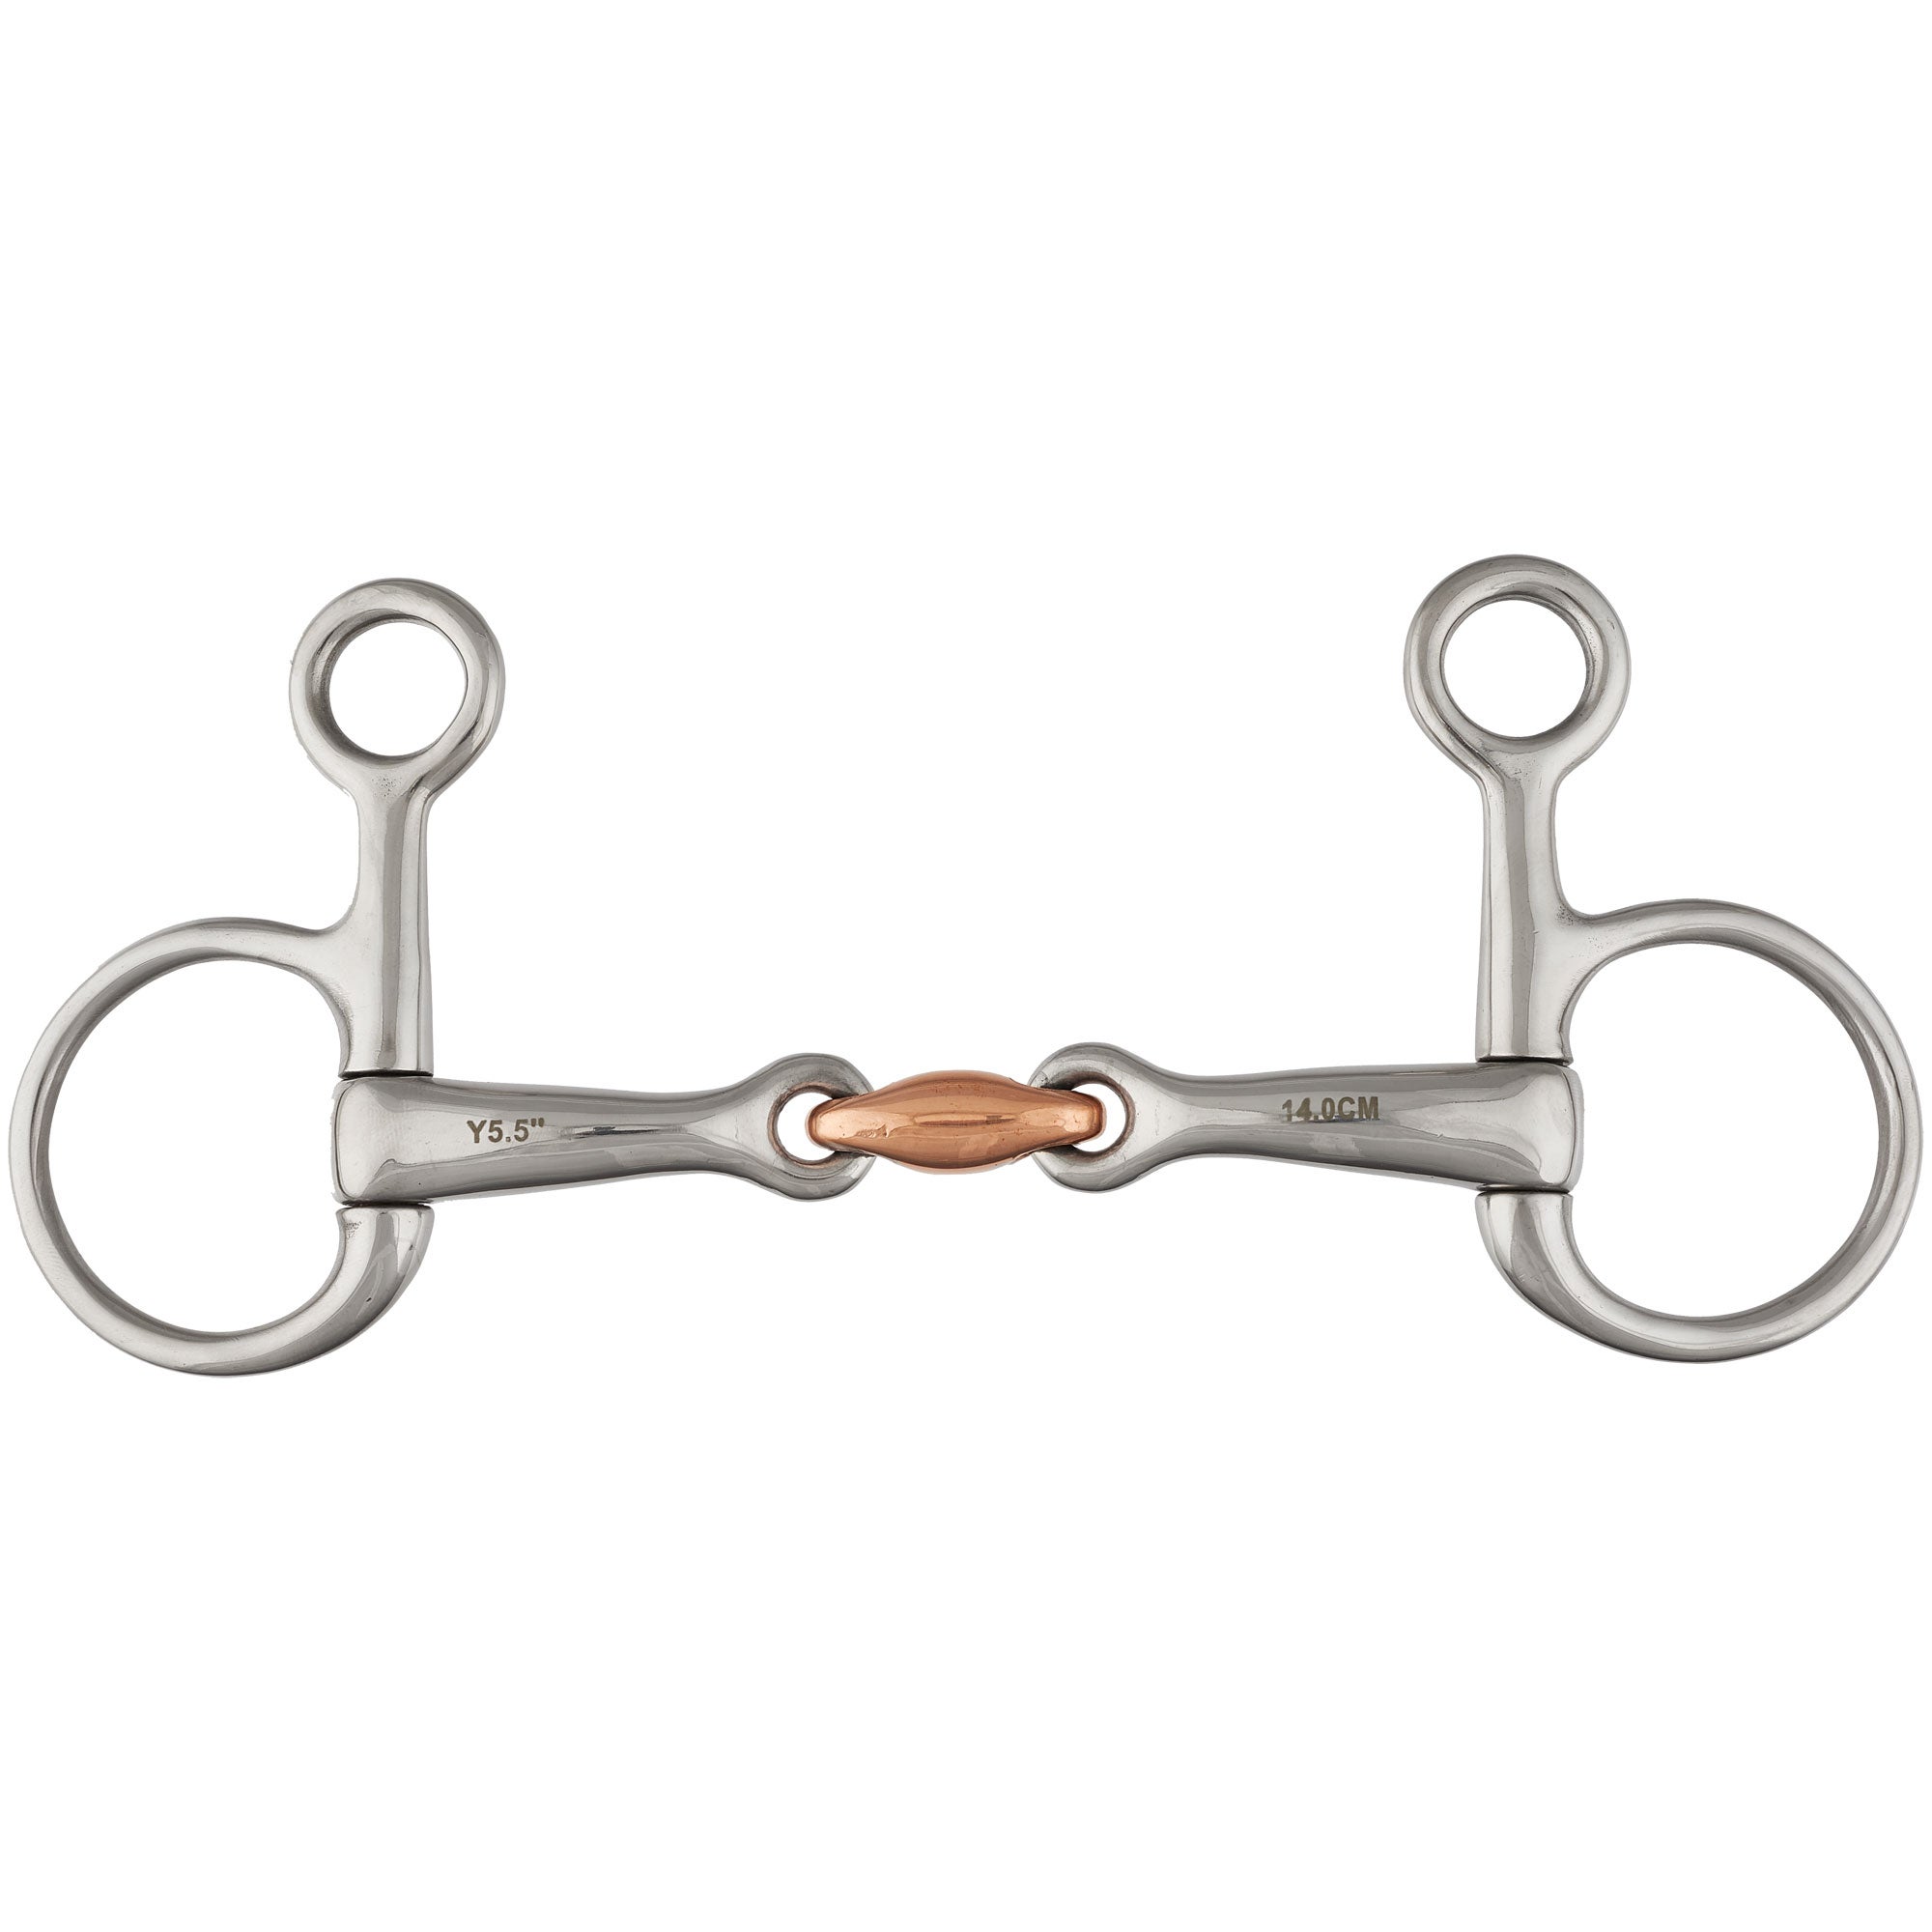 BAUCHER HANGING CHEEK SNAFFLE WITH COPPER MIX LOZENGE Verbindend Angled  H BITS 